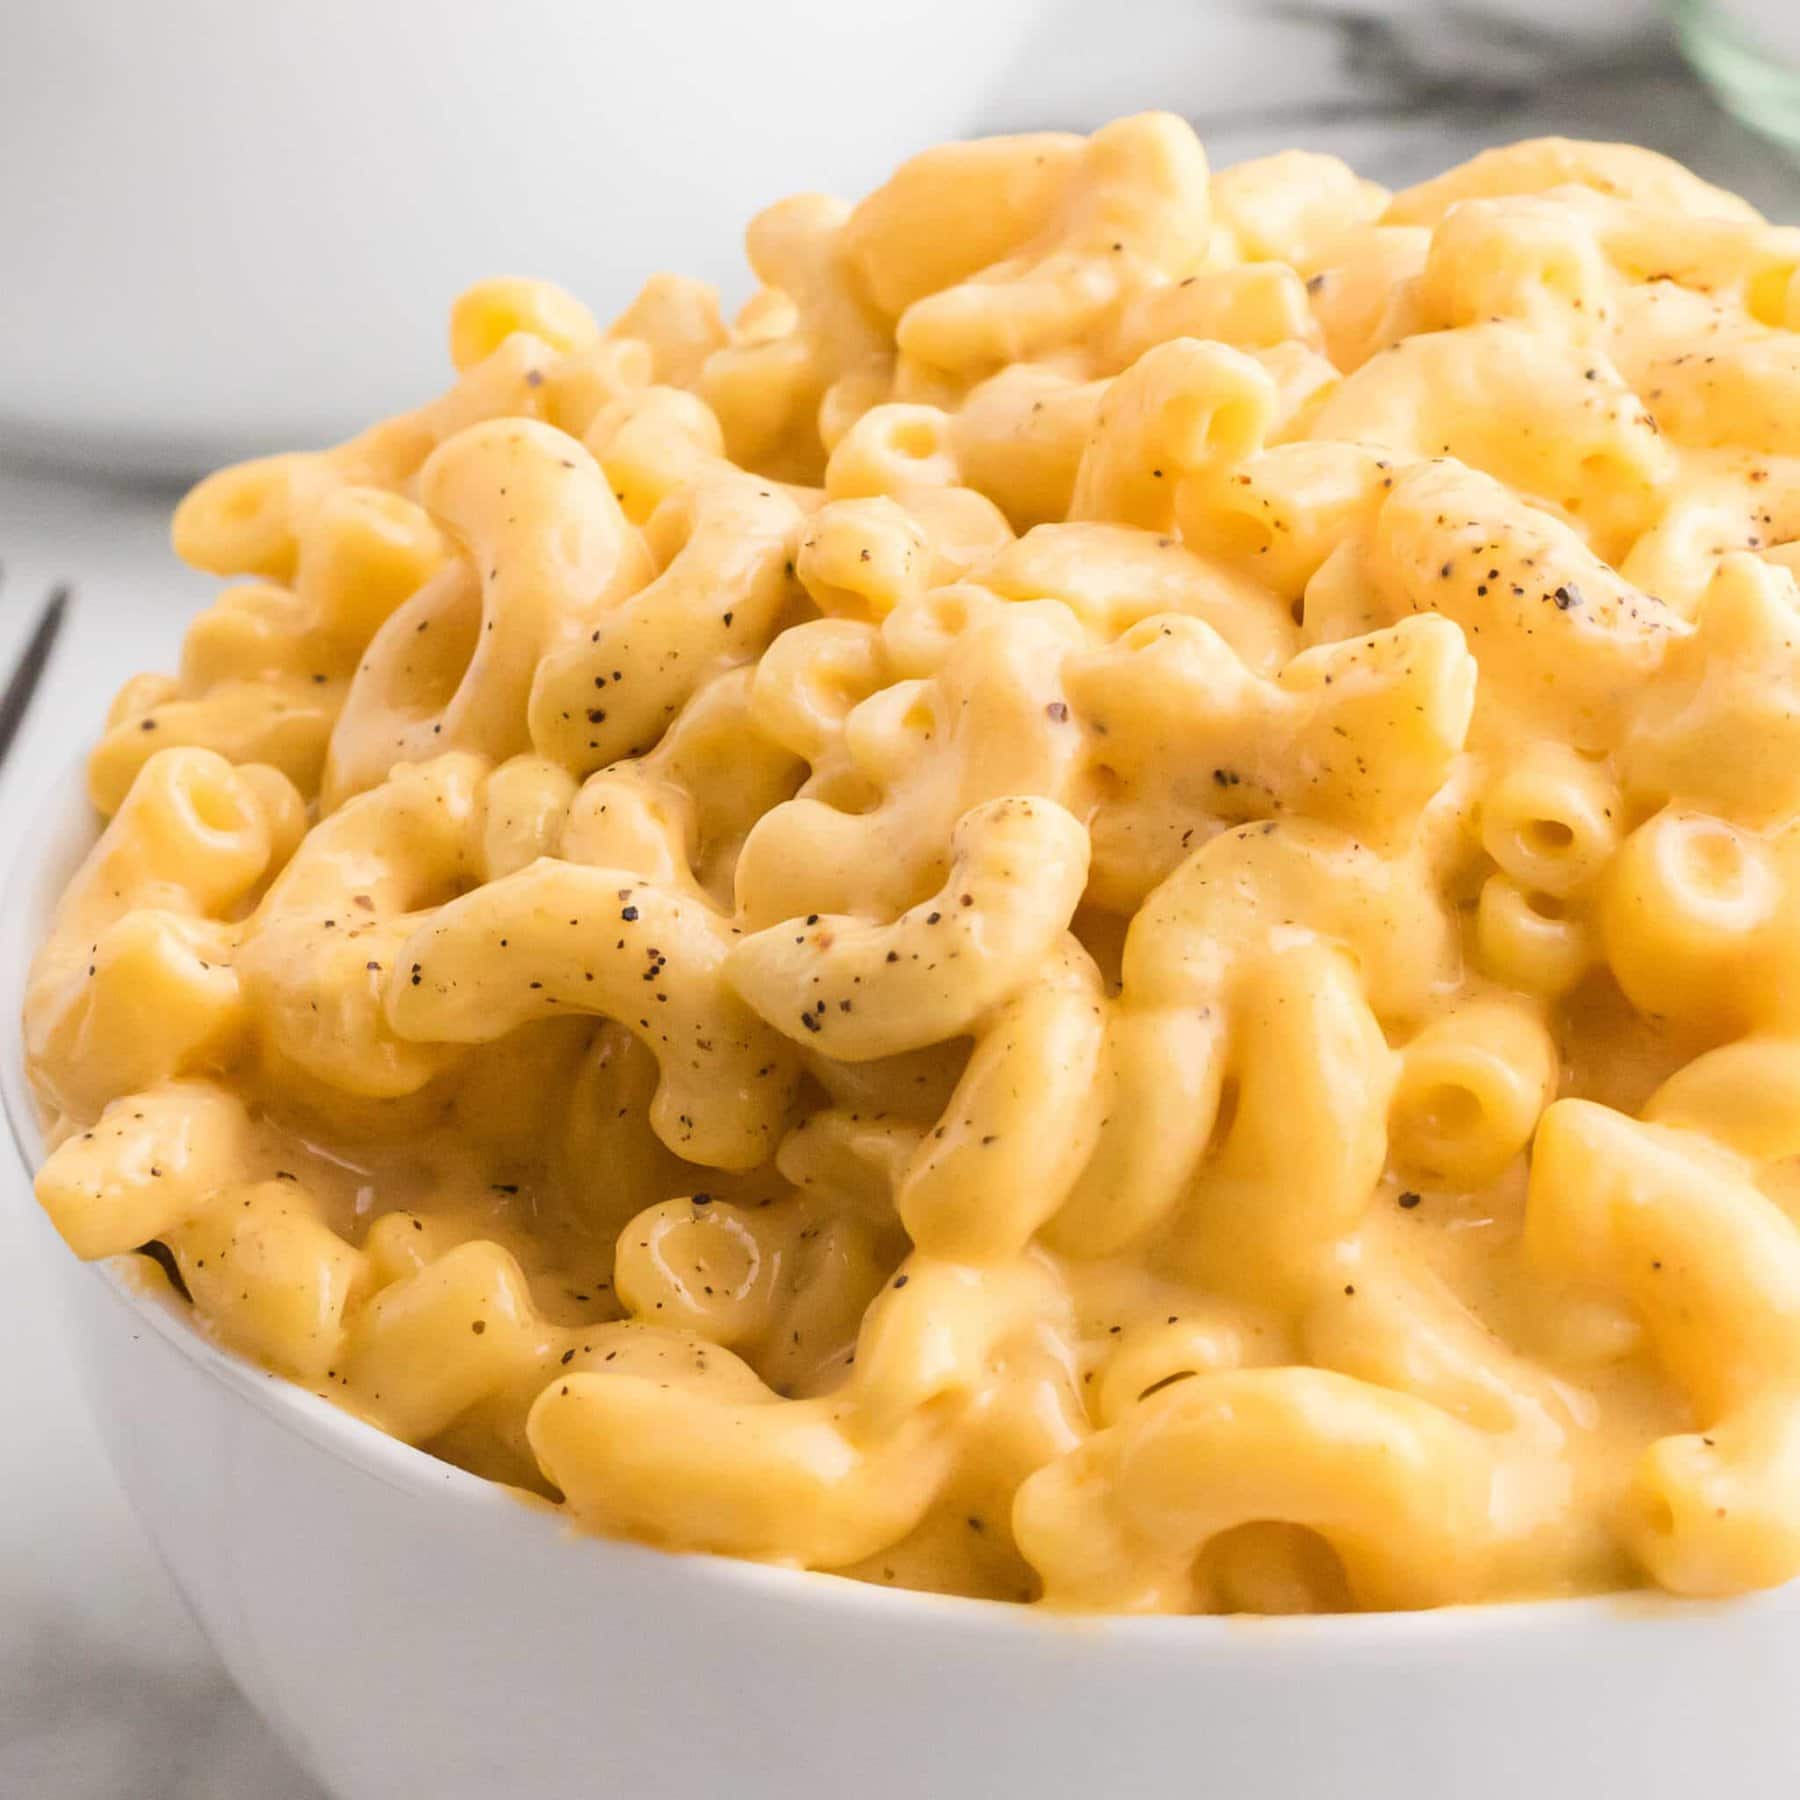 https://kitchenfunwithmy3sons.com/wp-content/uploads/2022/07/crock-pot-mac-and-cheese-feature-scaled.jpg